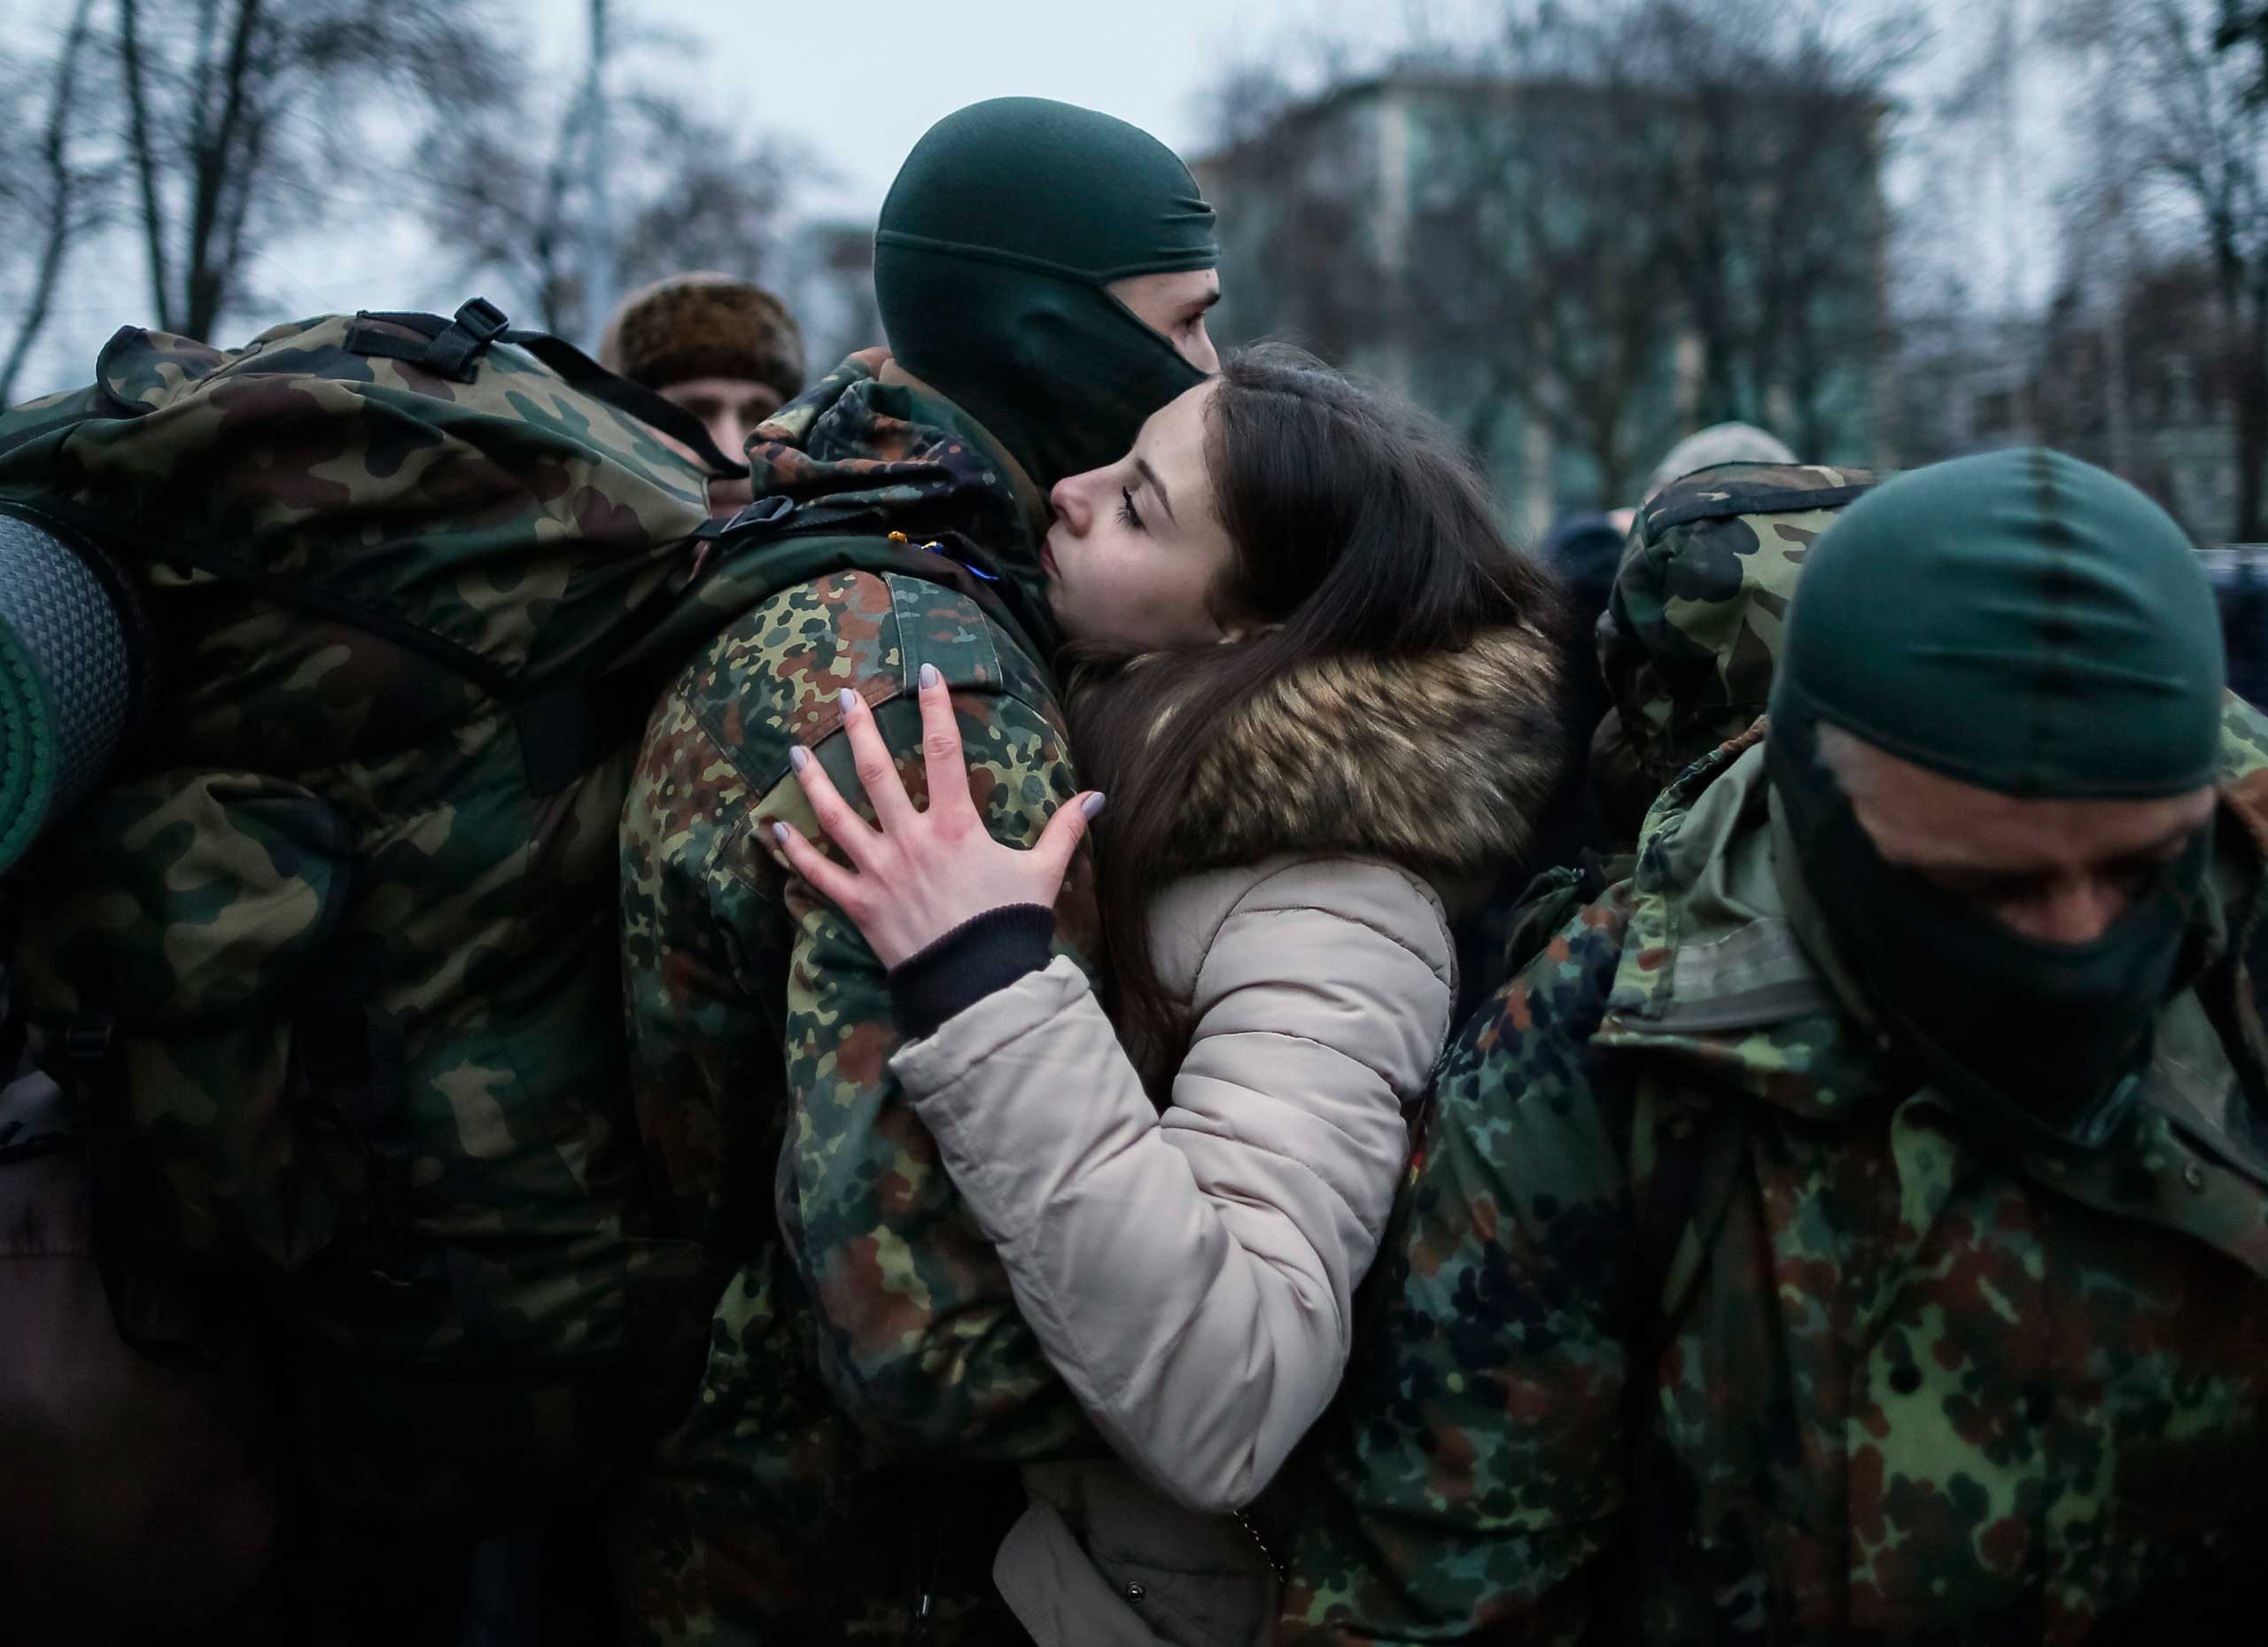 Jan. 17, 2015. A new volunteer for the Ukrainian Interior Ministry's Azov battalion embraces his girlfriend in central Kiev before he and other volunteers depart to the frontlines in eastern Ukraine. Fighting raged at the main airport of Donetsk, eastern Ukraine, as separatists resumed attempts to break the tenuous grip of government forces on the complex.